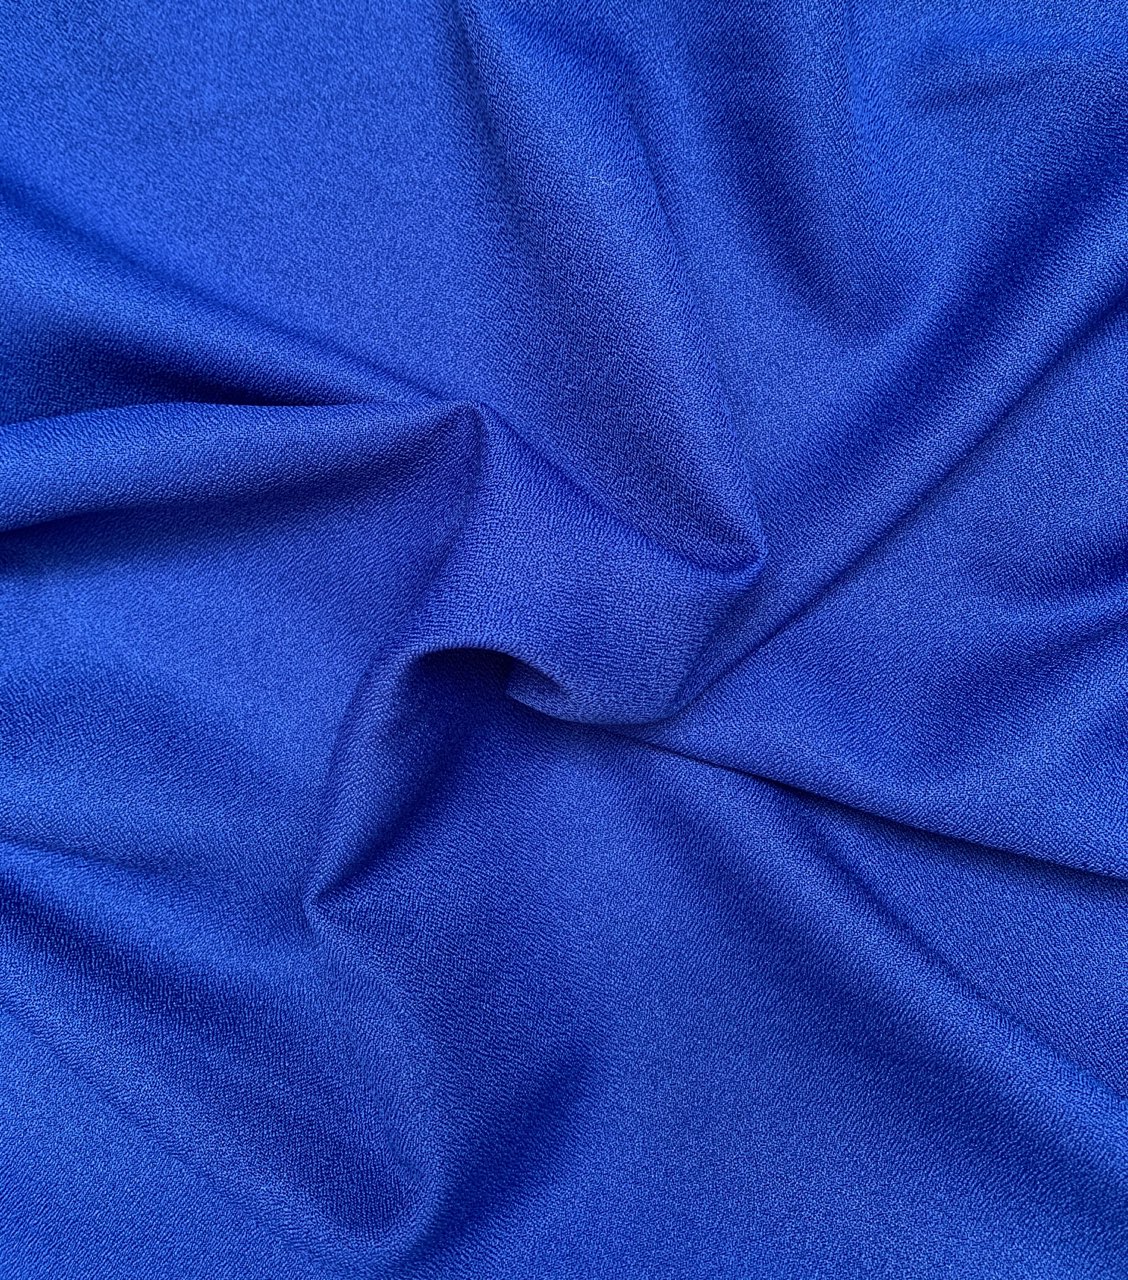 60" Wide Royal Crepe- By the yard (100% Polyester)